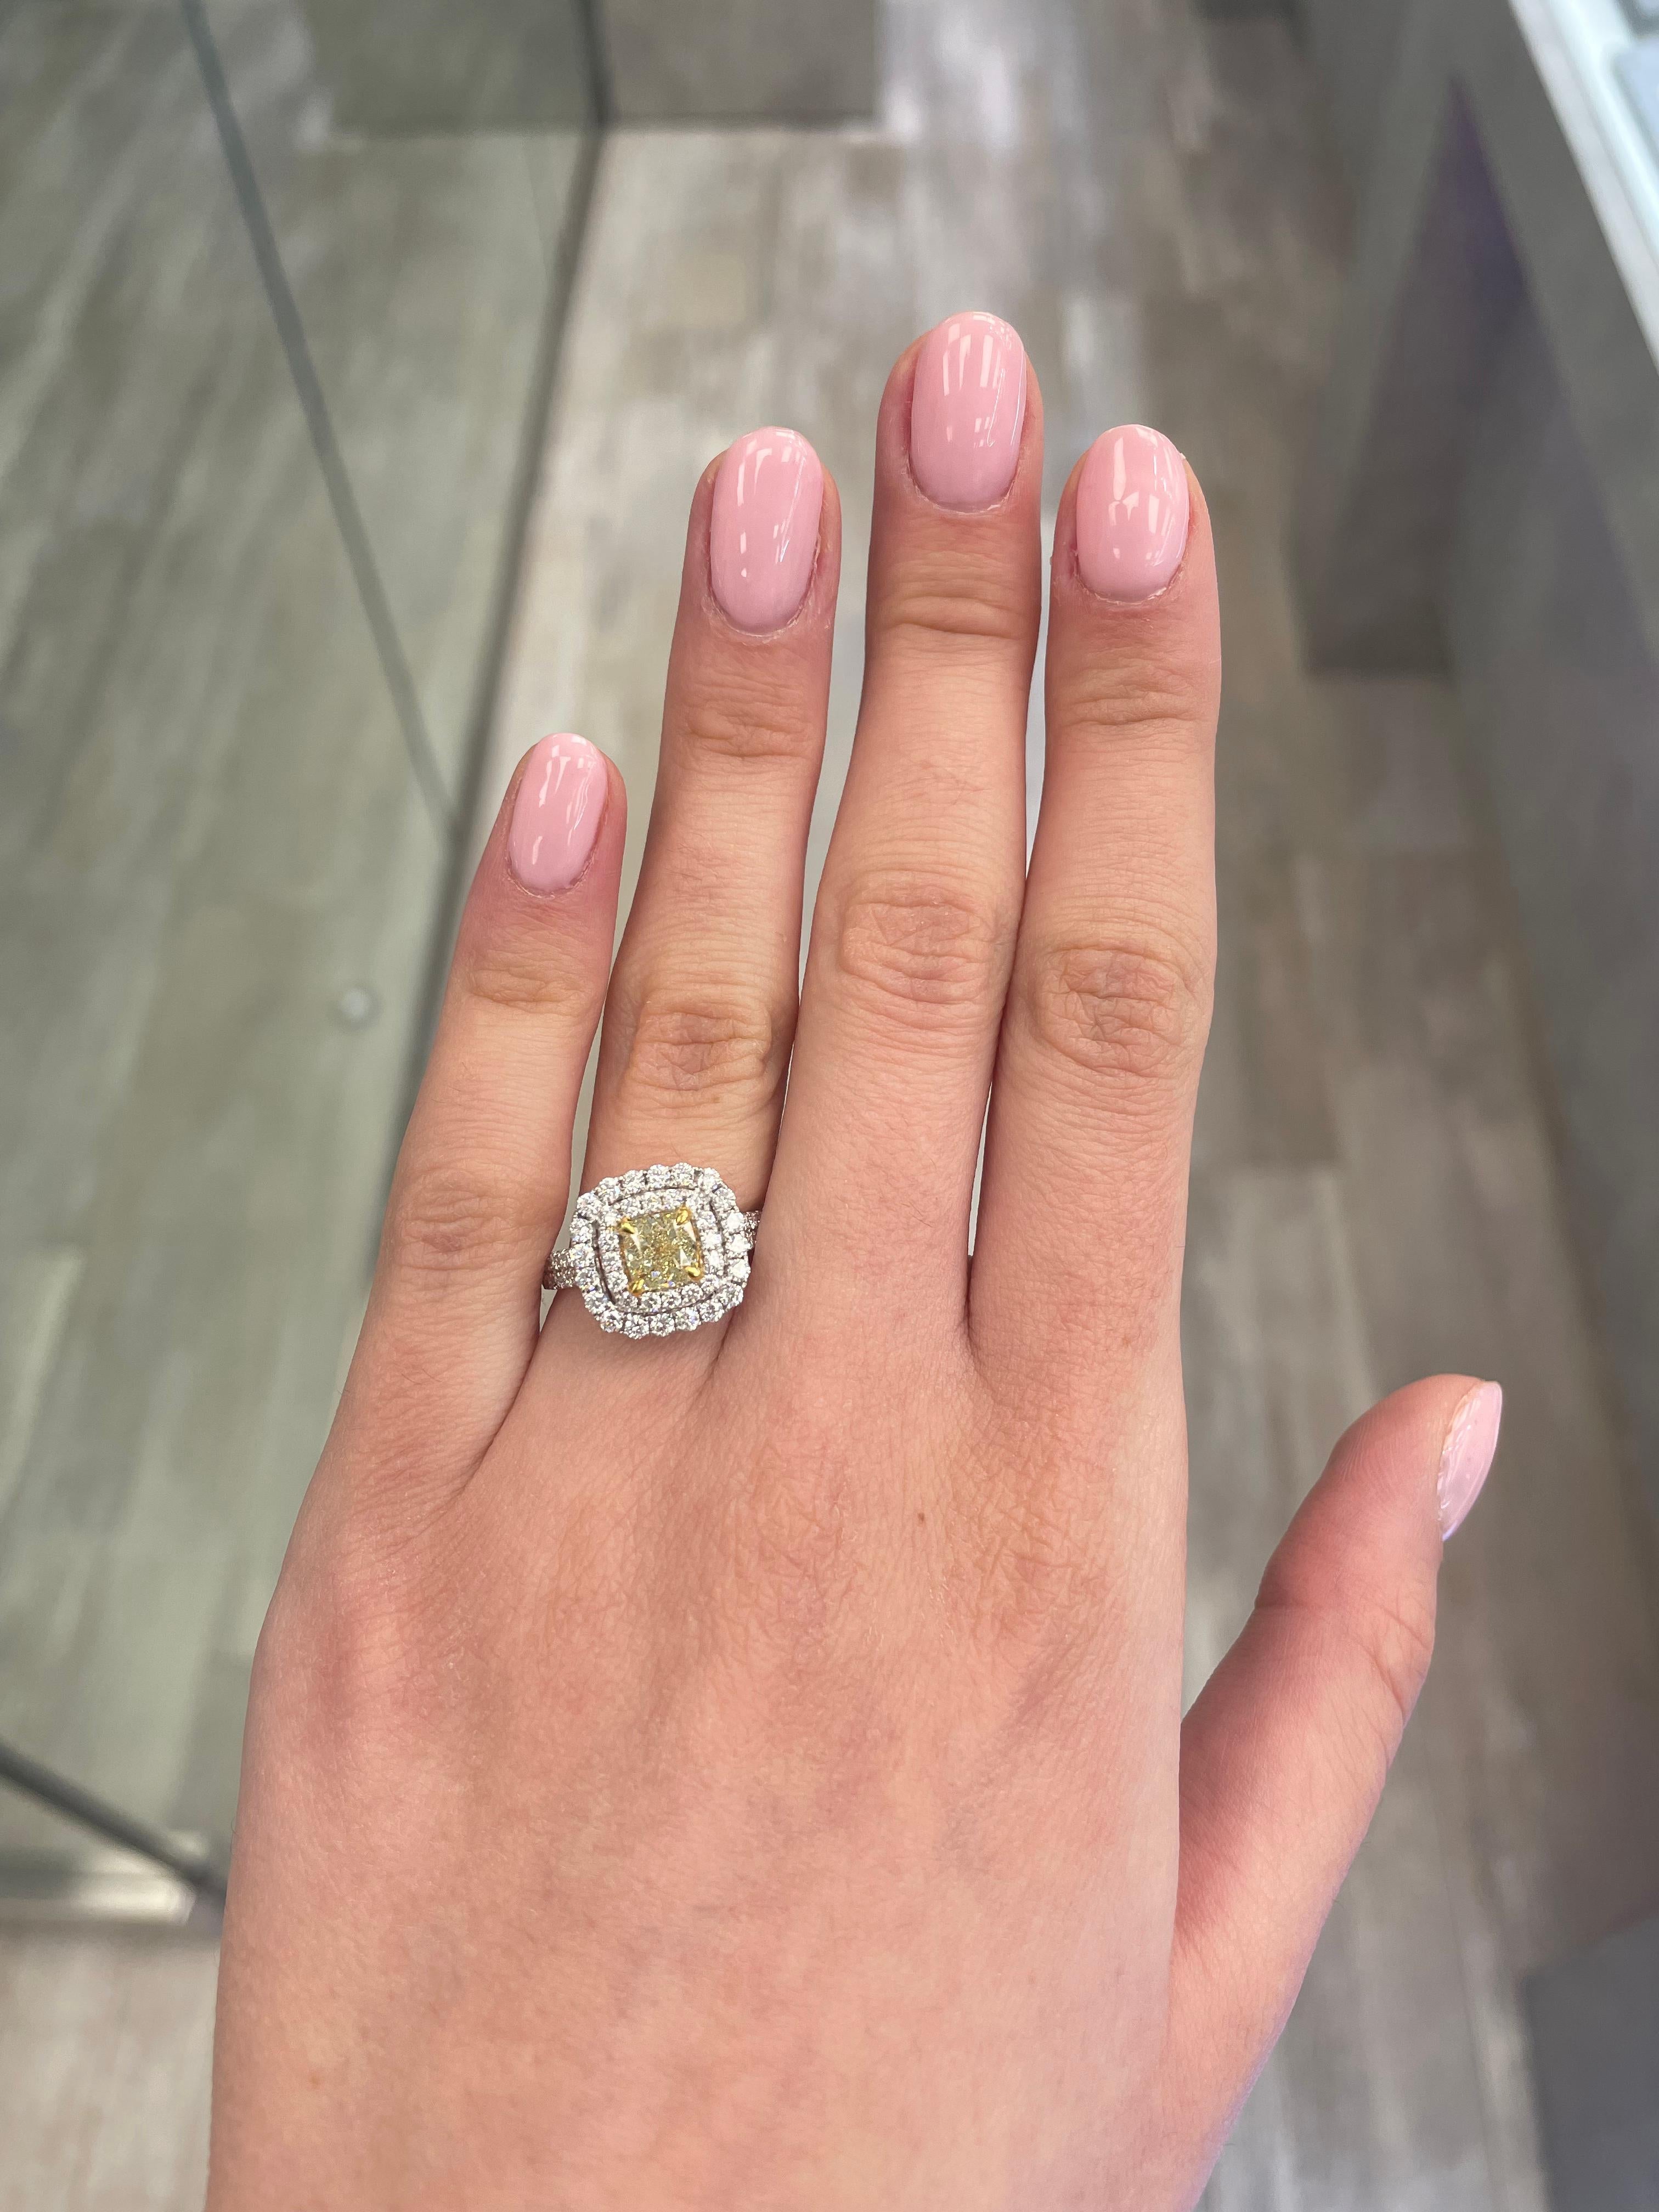 Stunning modern EGL certified yellow diamond double halo ring, two-tone 18k yellow and white gold. By Alexander Beverly Hills
2.08 carats total diamond weight.
1.11 carat cushion cut Fancy Yellow color and VS1 clarity diamond, EGL graded.